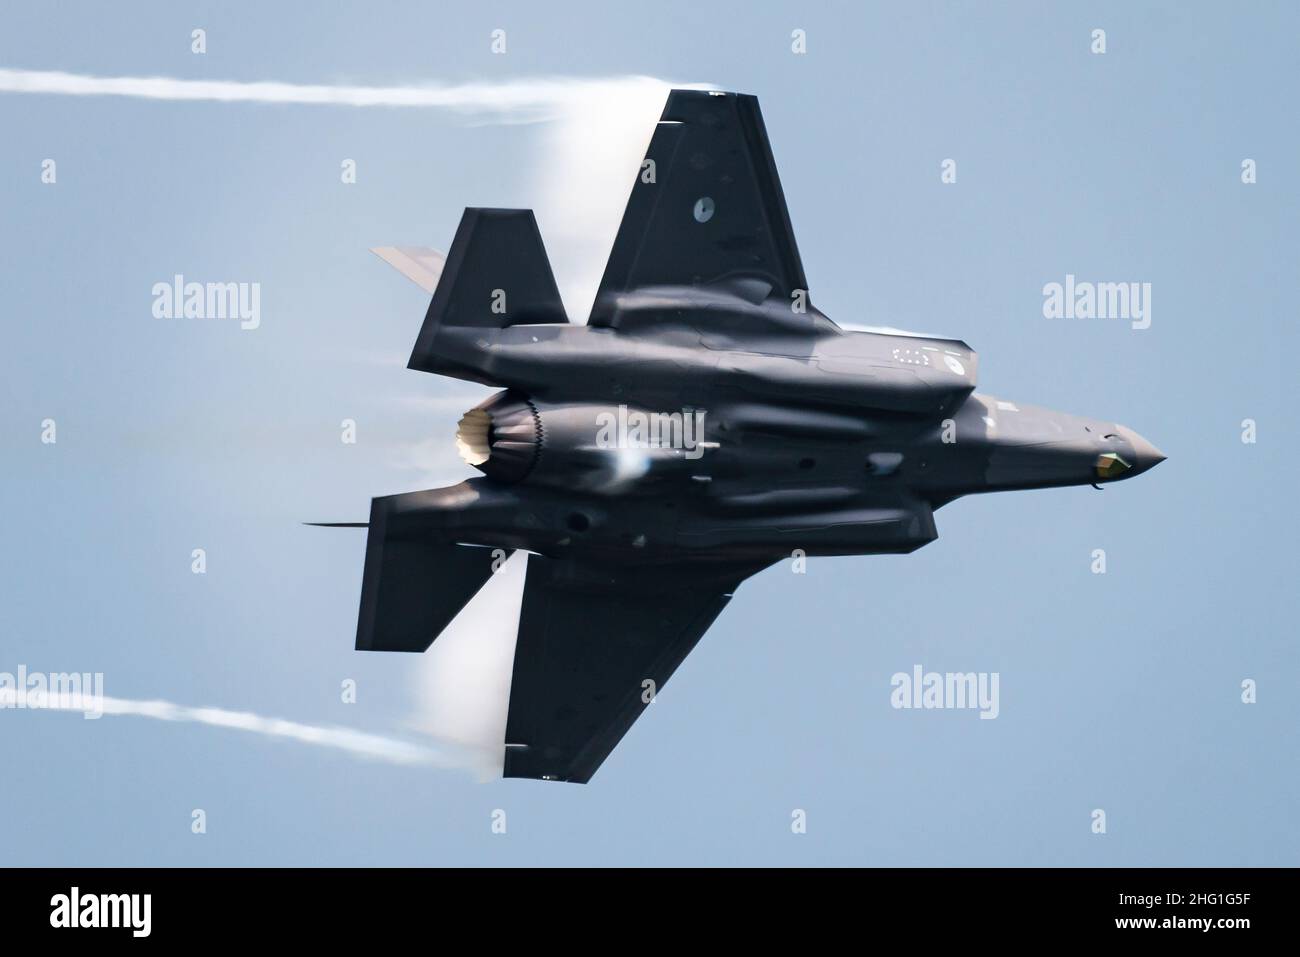 A Lockheed Martin F-35 Lightning II stealth fighter jet of the Royal Netherlands Air Force. Stock Photo